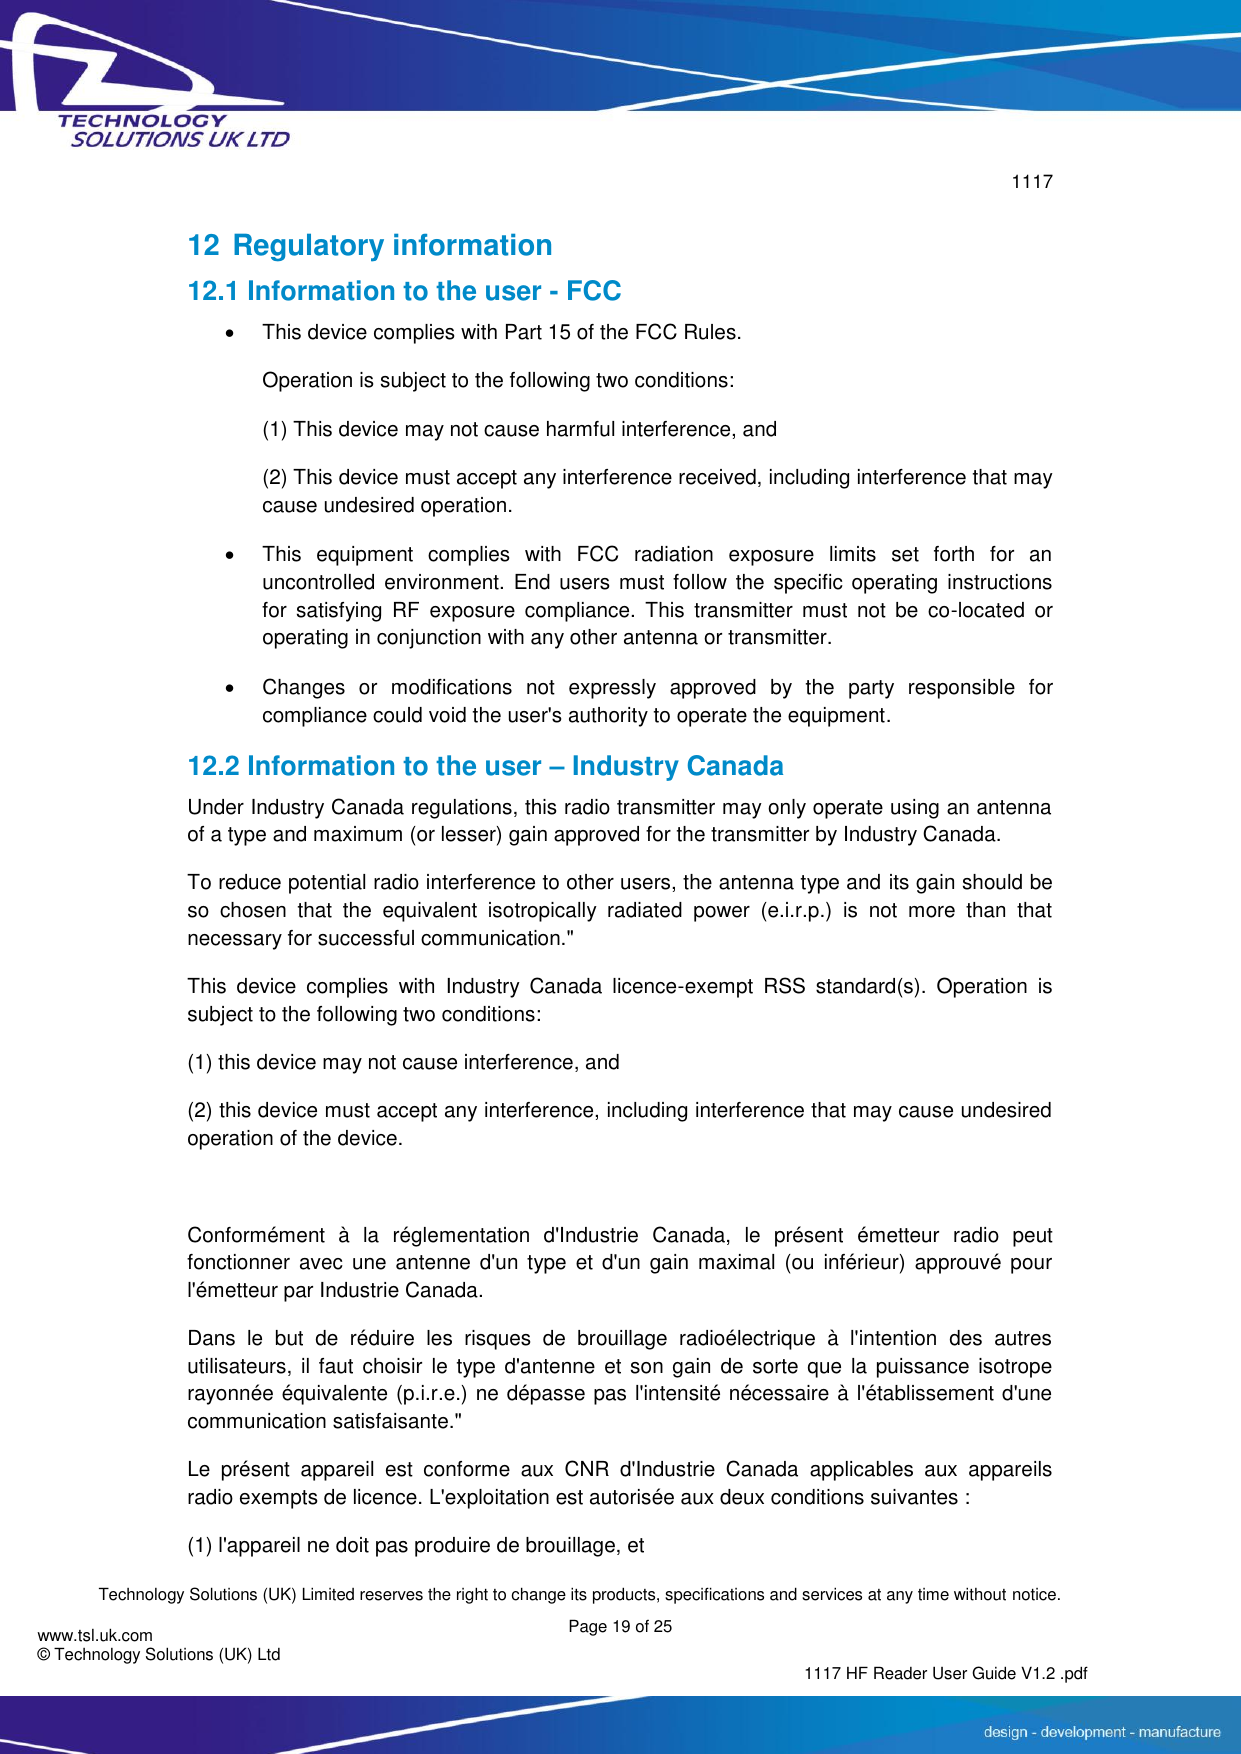        1117  Technology Solutions (UK) Limited reserves the right to change its products, specifications and services at any time without notice. Page 19 of 25 1117 HF Reader User Guide V1.2 .pdf www.tsl.uk.com © Technology Solutions (UK) Ltd   12 Regulatory information 12.1 Information to the user - FCC   This device complies with Part 15 of the FCC Rules.  Operation is subject to the following two conditions:  (1) This device may not cause harmful interference, and  (2) This device must accept any interference received, including interference that may cause undesired operation.    This  equipment  complies  with  FCC  radiation  exposure  limits  set  forth  for  an uncontrolled  environment.  End users must follow the  specific operating  instructions for  satisfying  RF  exposure  compliance.  This  transmitter  must  not  be  co-located  or operating in conjunction with any other antenna or transmitter.    Changes  or  modifications  not  expressly  approved  by  the  party  responsible  for compliance could void the user&apos;s authority to operate the equipment. 12.2 Information to the user – Industry Canada Under Industry Canada regulations, this radio transmitter may only operate using an antenna of a type and maximum (or lesser) gain approved for the transmitter by Industry Canada. To reduce potential radio interference to other users, the antenna type and its gain should be so  chosen  that  the  equivalent  isotropically  radiated  power  (e.i.r.p.)  is  not  more  than  that necessary for successful communication.&quot; This  device  complies  with  Industry  Canada  licence-exempt  RSS  standard(s).  Operation  is subject to the following two conditions: (1) this device may not cause interference, and  (2) this device must accept any interference, including interference that may cause undesired operation of the device.  Conformément  à  la  réglementation  d&apos;Industrie  Canada,  le  présent  émetteur  radio  peut fonctionner  avec  une  antenne  d&apos;un type  et  d&apos;un gain  maximal  (ou inférieur)  approuvé  pour l&apos;émetteur par Industrie Canada.  Dans  le  but  de  réduire  les  risques  de  brouillage  radioélectrique  à  l&apos;intention  des  autres utilisateurs, il faut  choisir le  type  d&apos;antenne et son gain  de  sorte  que la puissance isotrope rayonnée équivalente (p.i.r.e.) ne dépasse pas l&apos;intensité nécessaire à l&apos;établissement d&apos;une communication satisfaisante.&quot; Le  présent  appareil  est  conforme  aux  CNR  d&apos;Industrie  Canada  applicables  aux  appareils radio exempts de licence. L&apos;exploitation est autorisée aux deux conditions suivantes : (1) l&apos;appareil ne doit pas produire de brouillage, et 